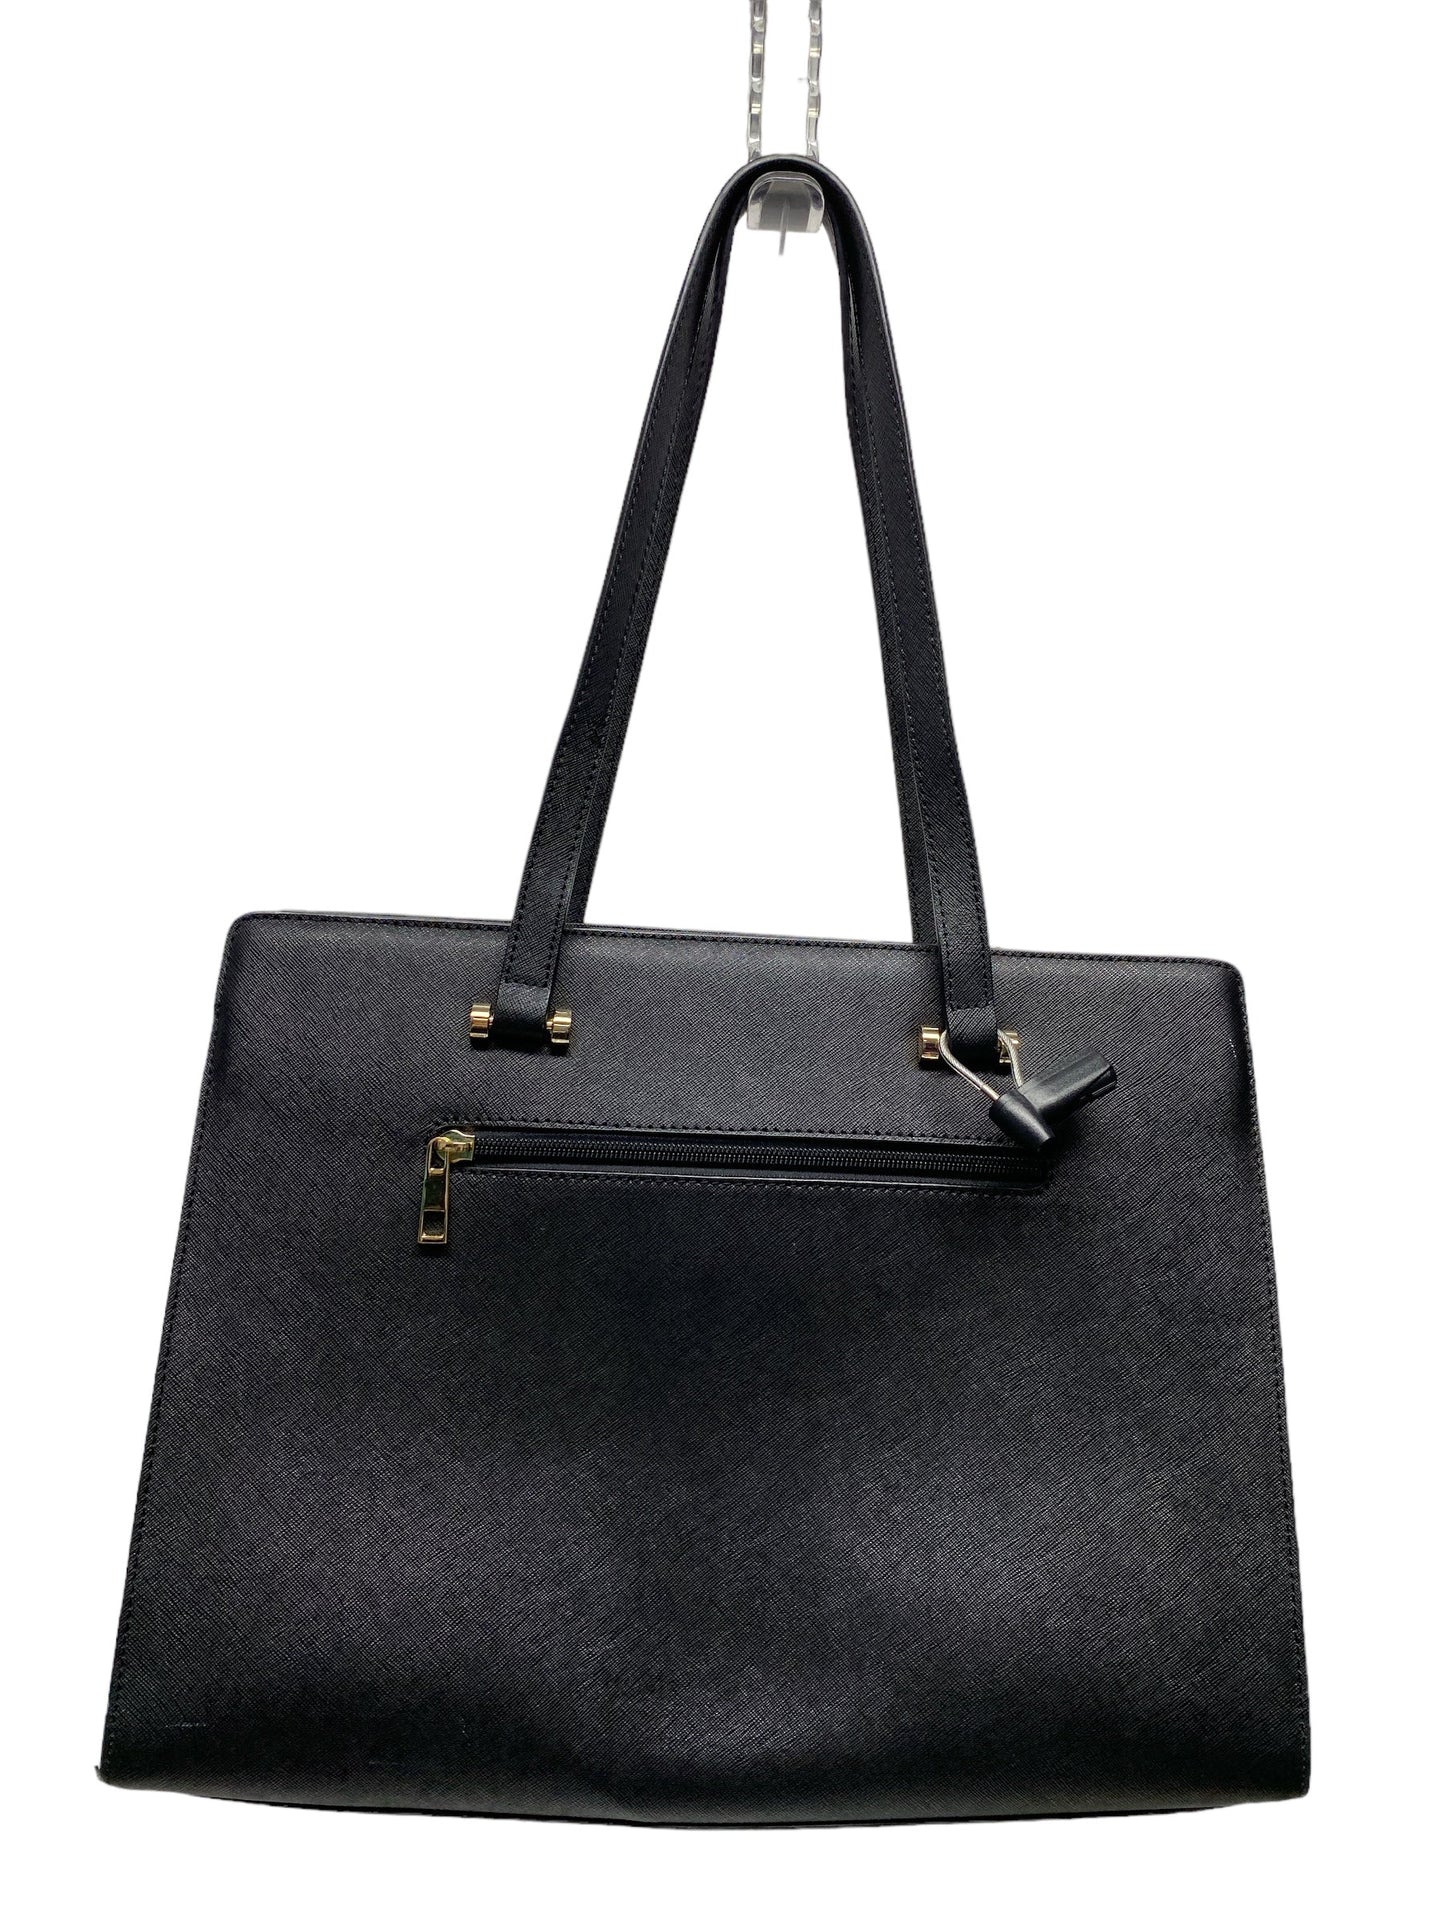 Tote By White House Black Market  Size: Large